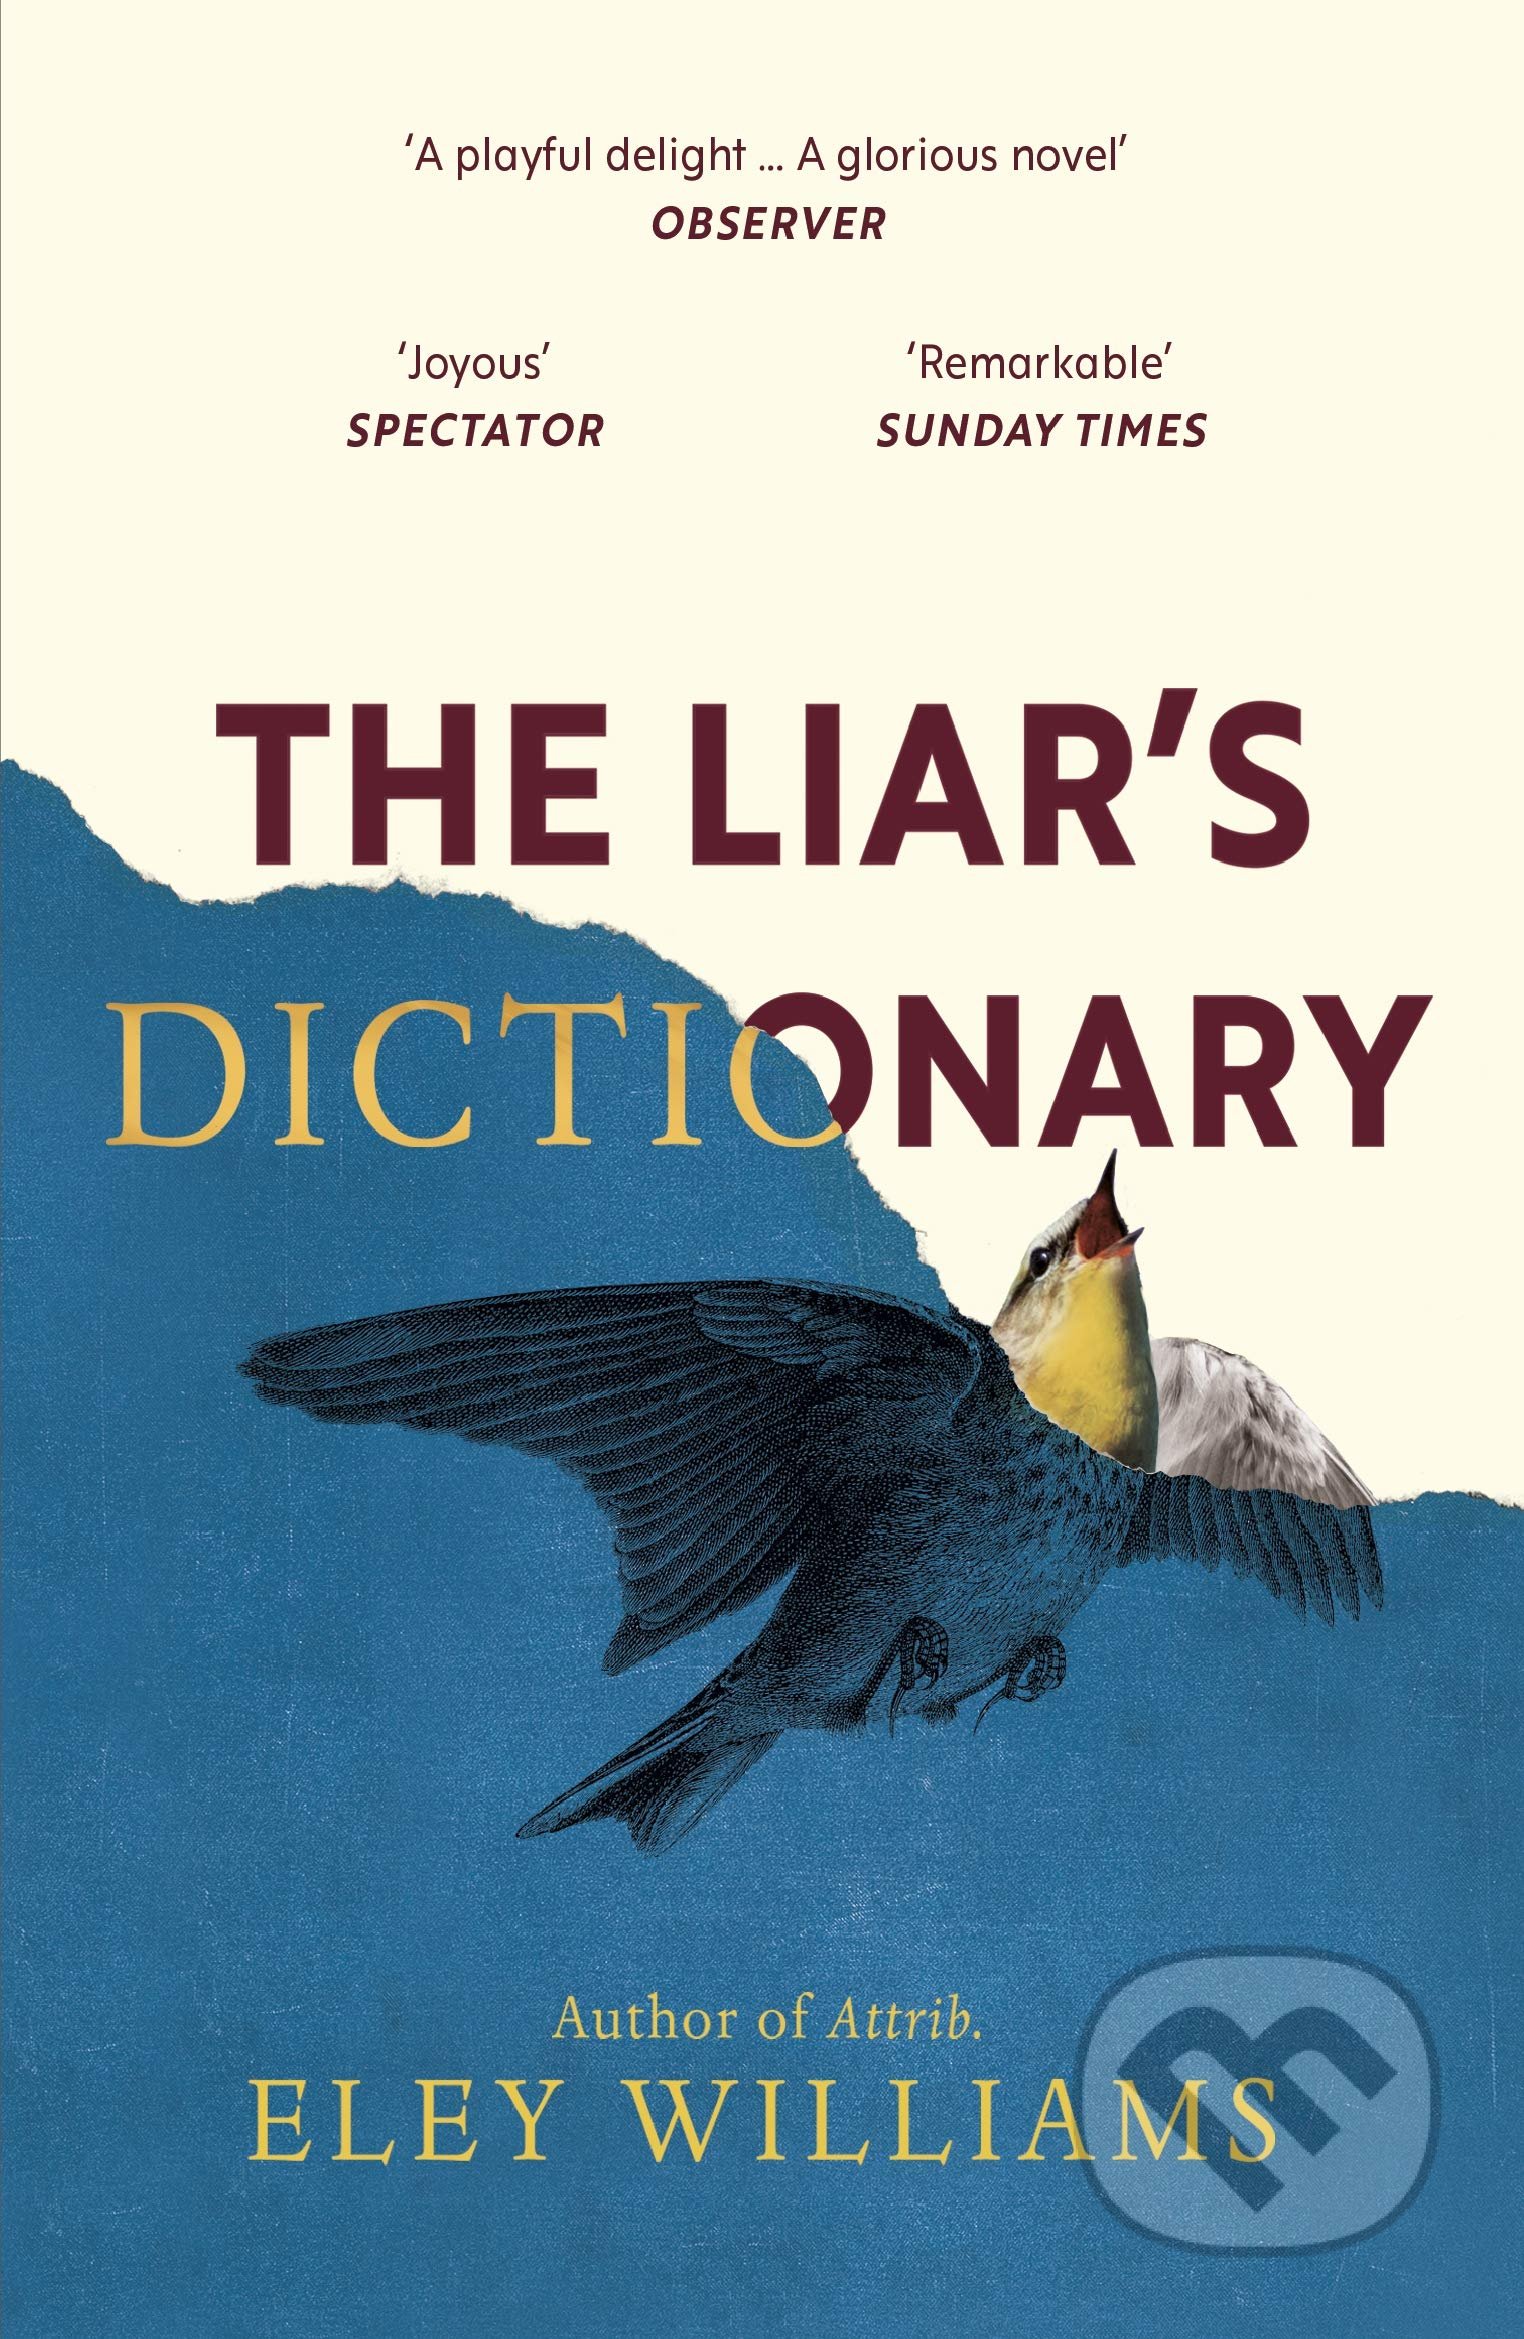 The Liars Dictionary - Eley Williams, Windmill Books, 2021